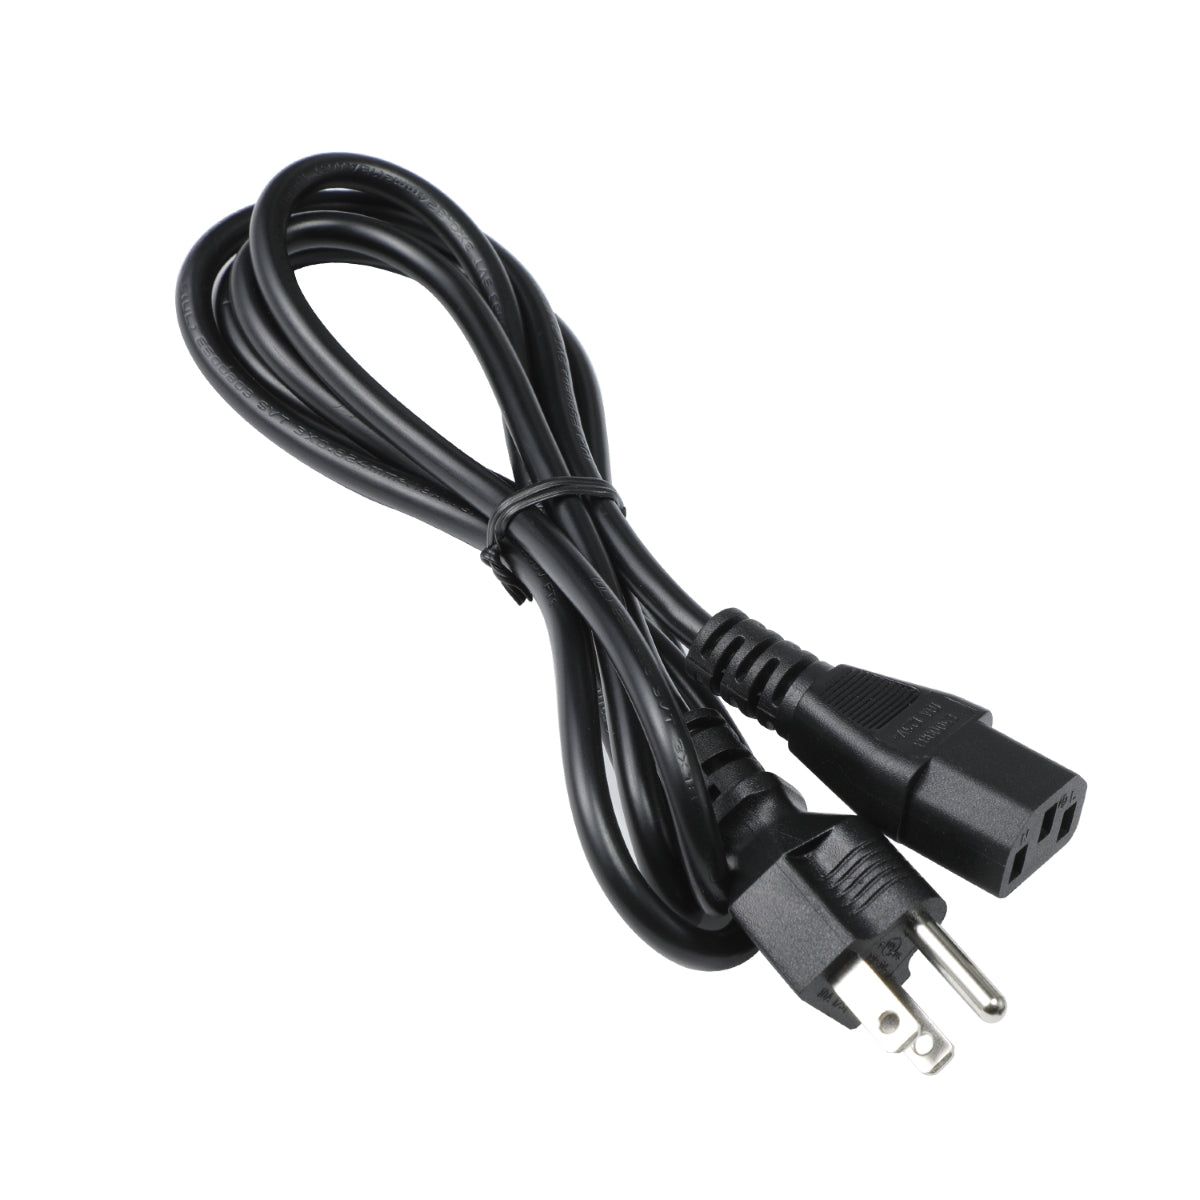 Power Cord for AOC C24G1 Monitor.